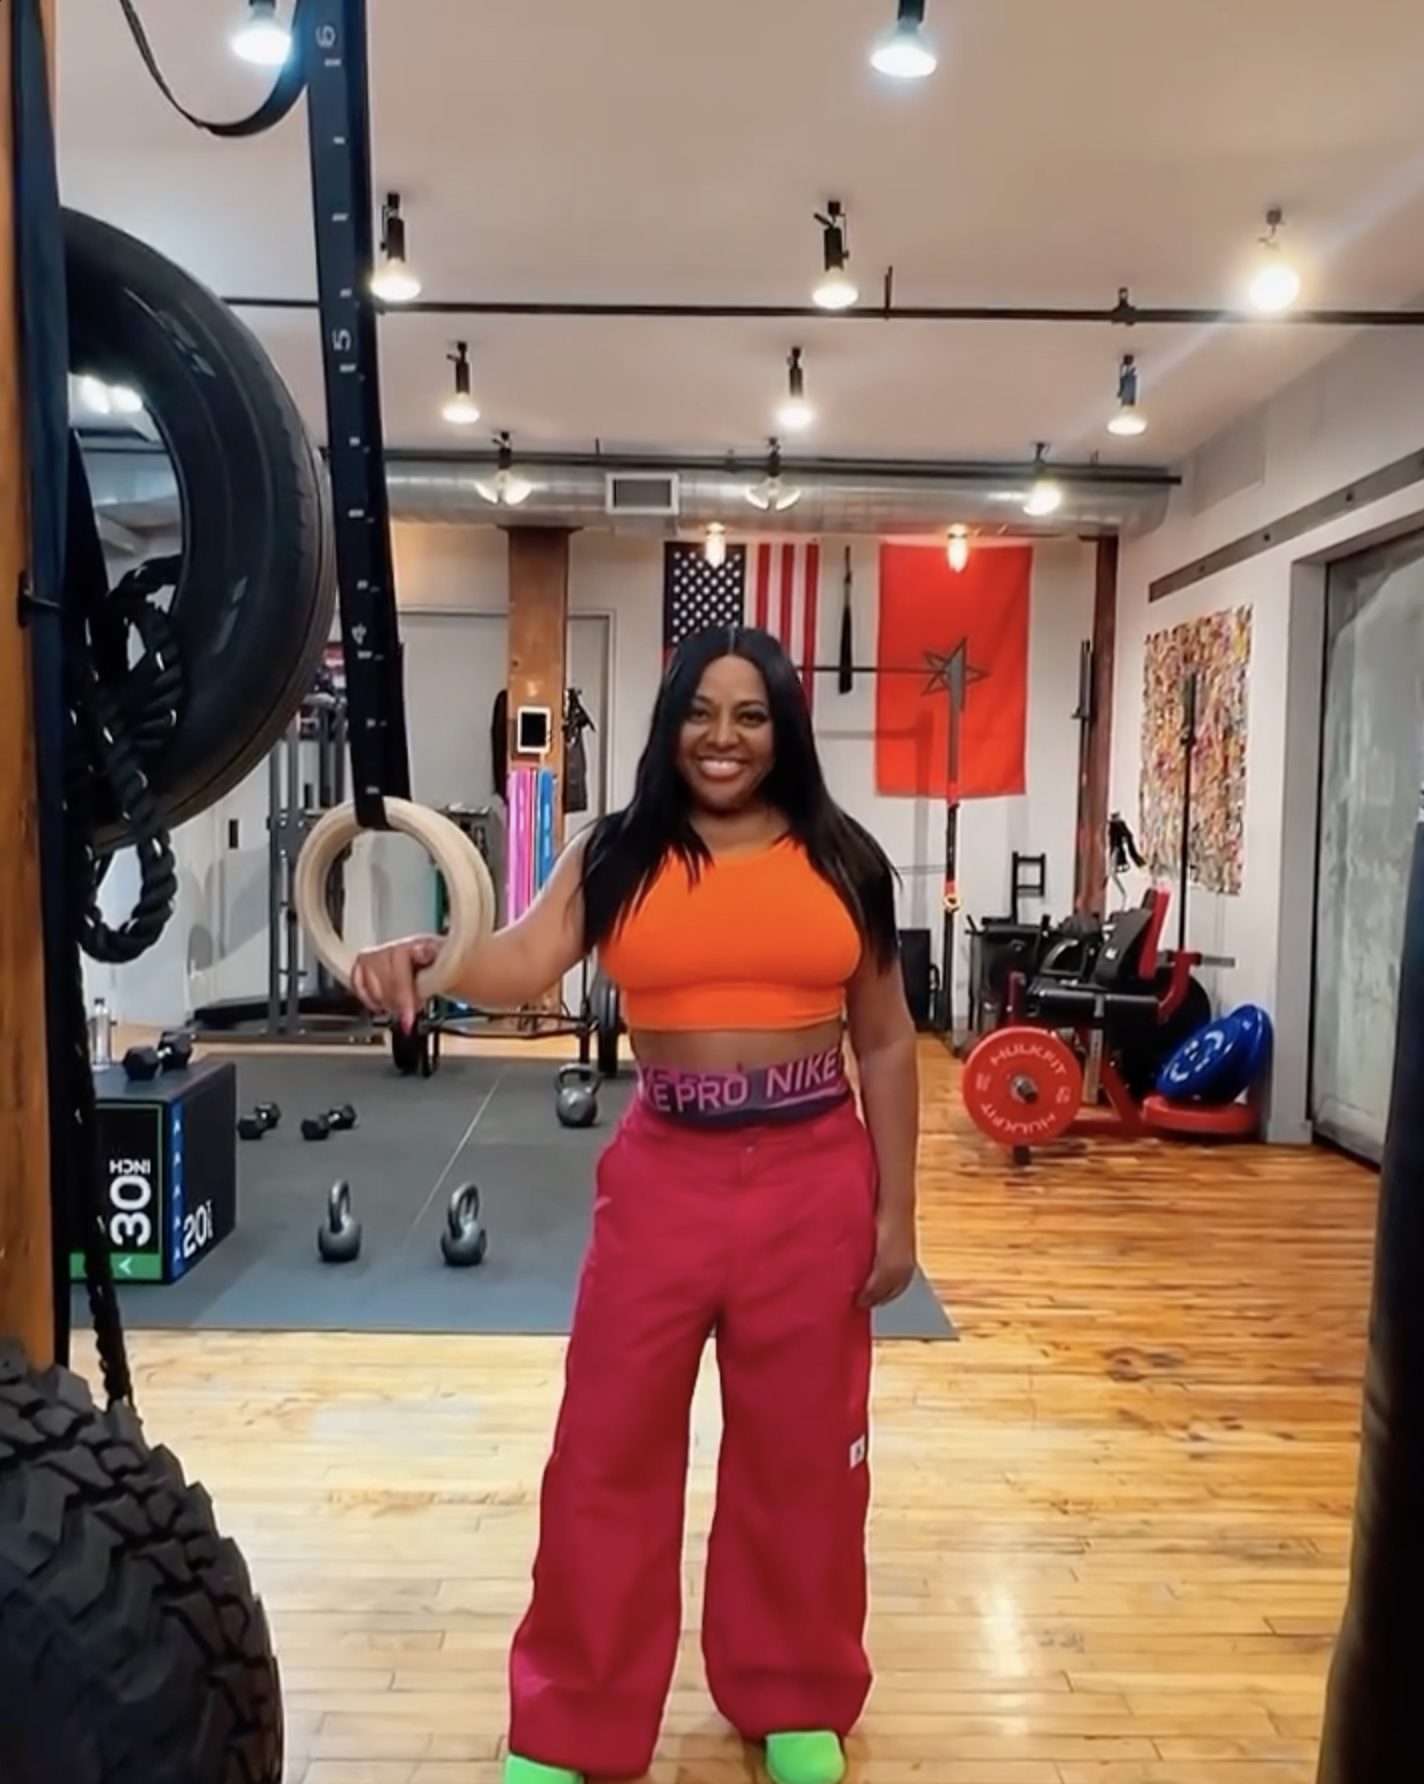 On Friday, the Sherri talk show host uploaded a video of her inside her at-home gym in a stylish athleisure ensemble